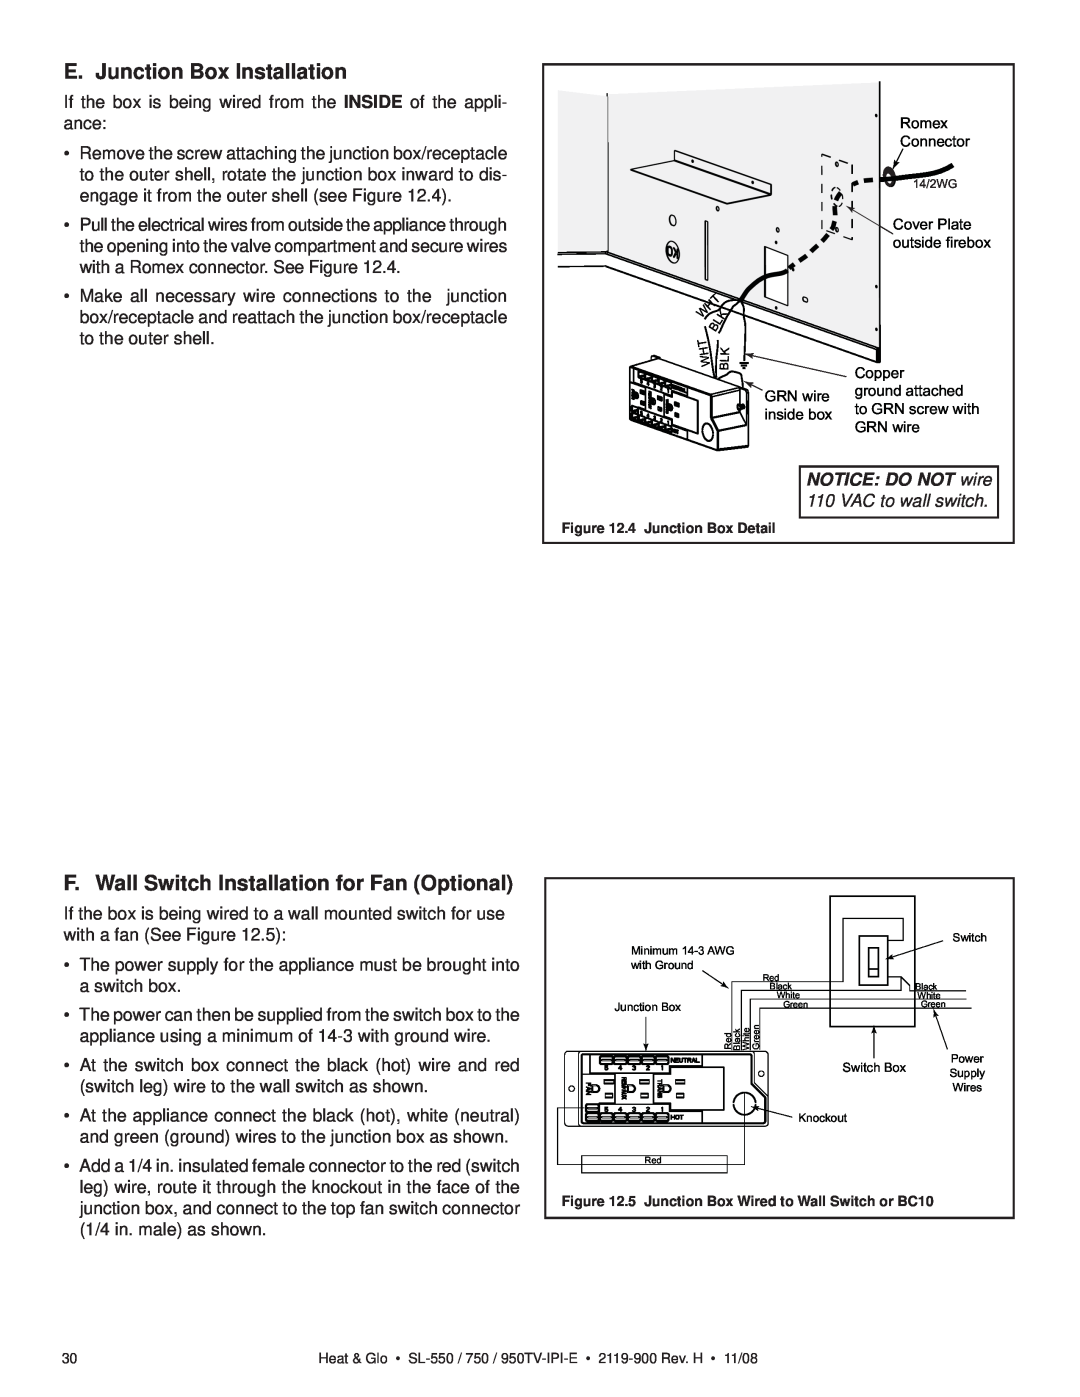 Hearth and Home Technologies SL-750TV-IPI-E E. Junction Box Installation, F. Wall Switch Installation for Fan Optional 